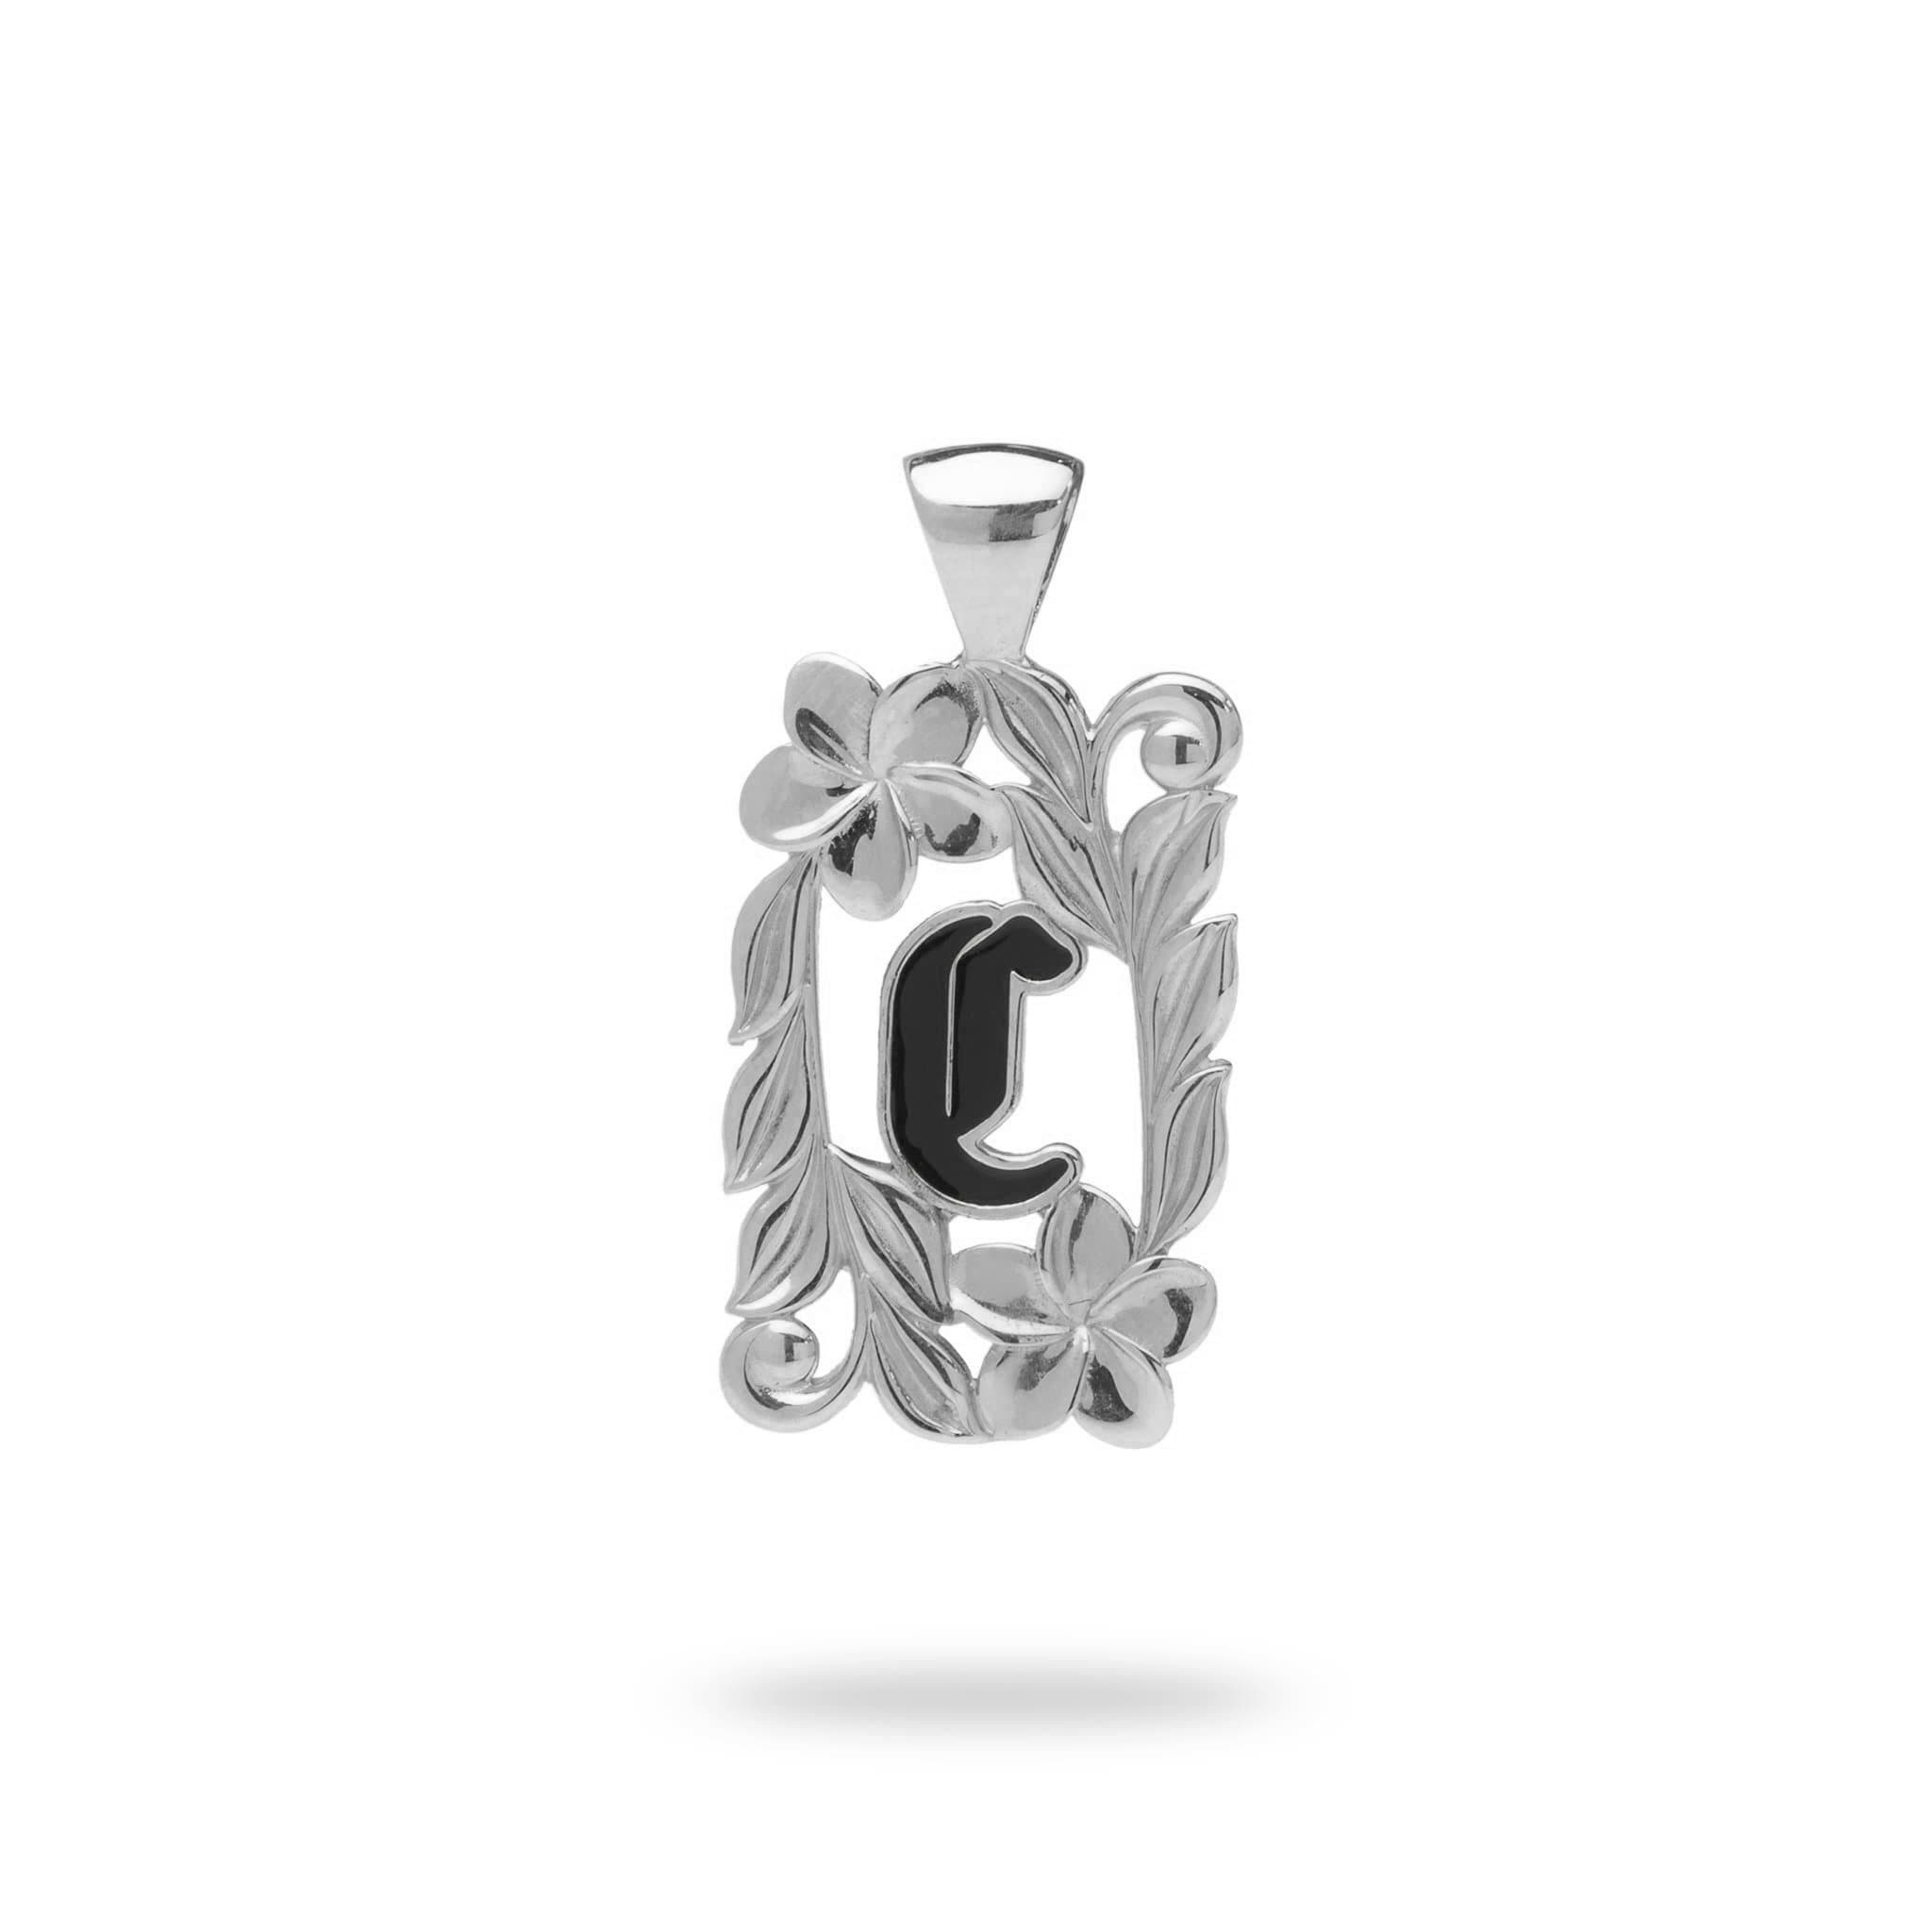 Special Order Hawaiian Heirloom Initial Pendant in White Gold - 014-03615-C-14W